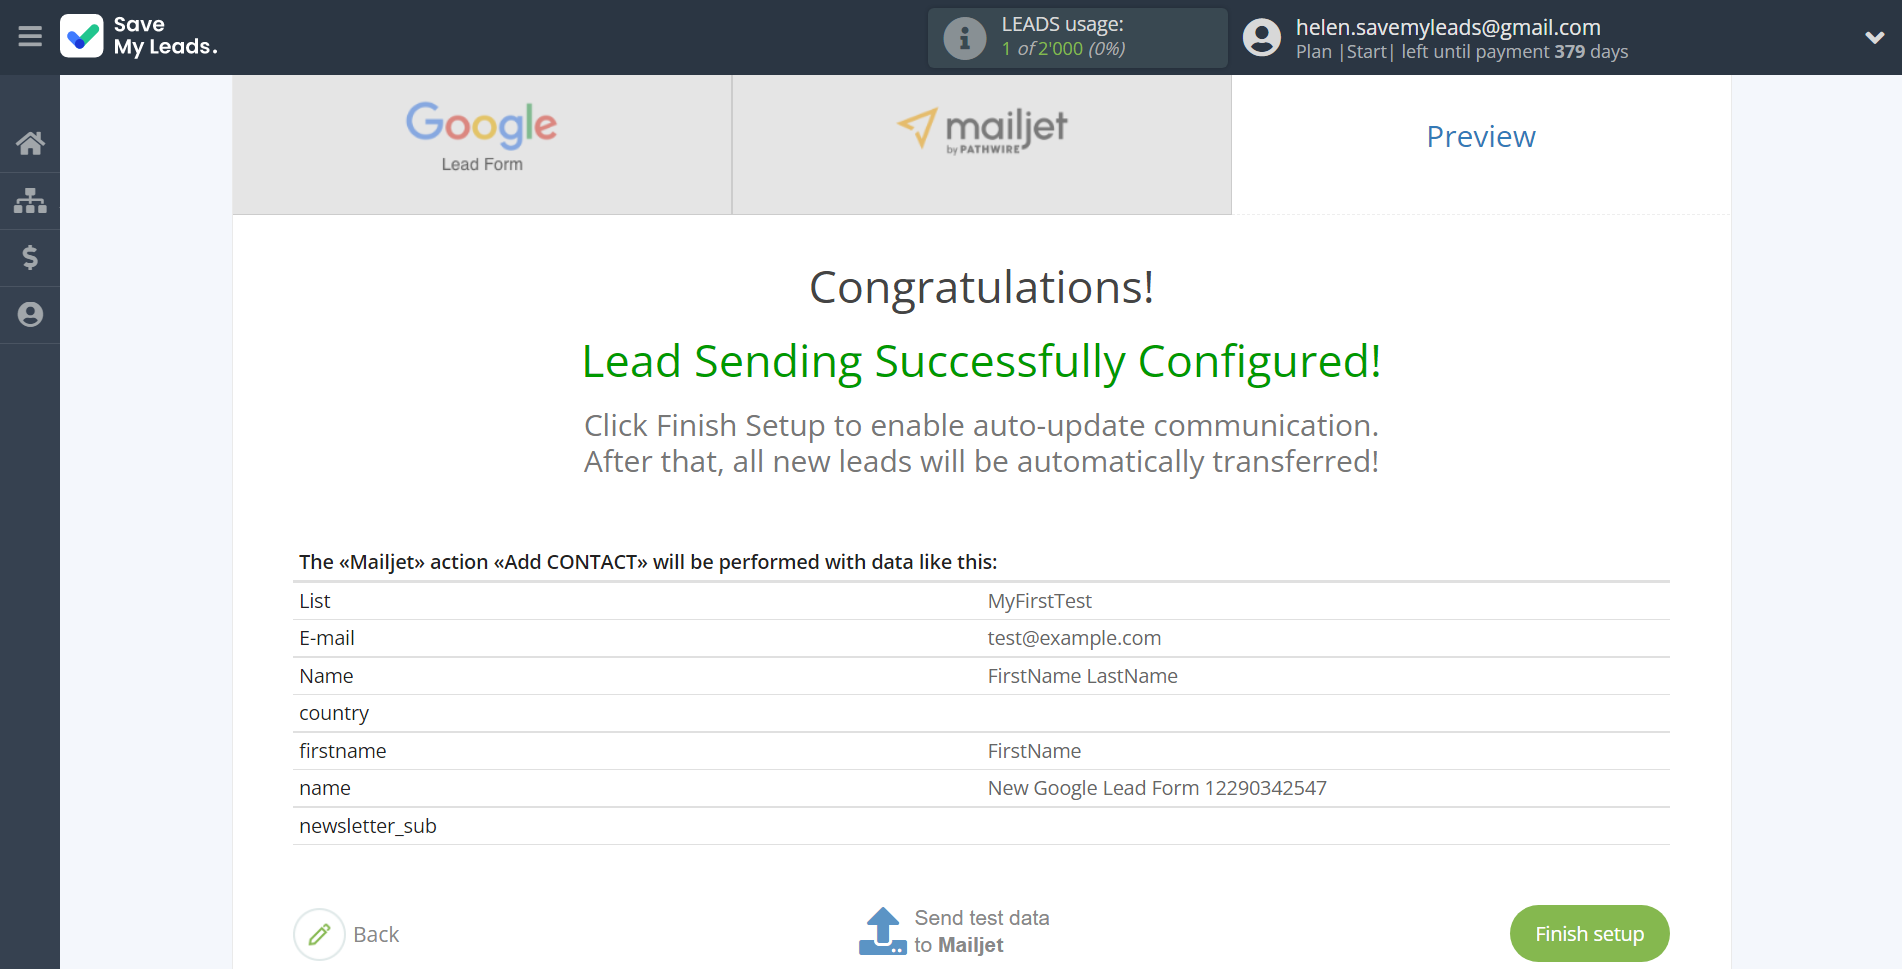 How to Connect Google Lead Form with Mailjet | Test data